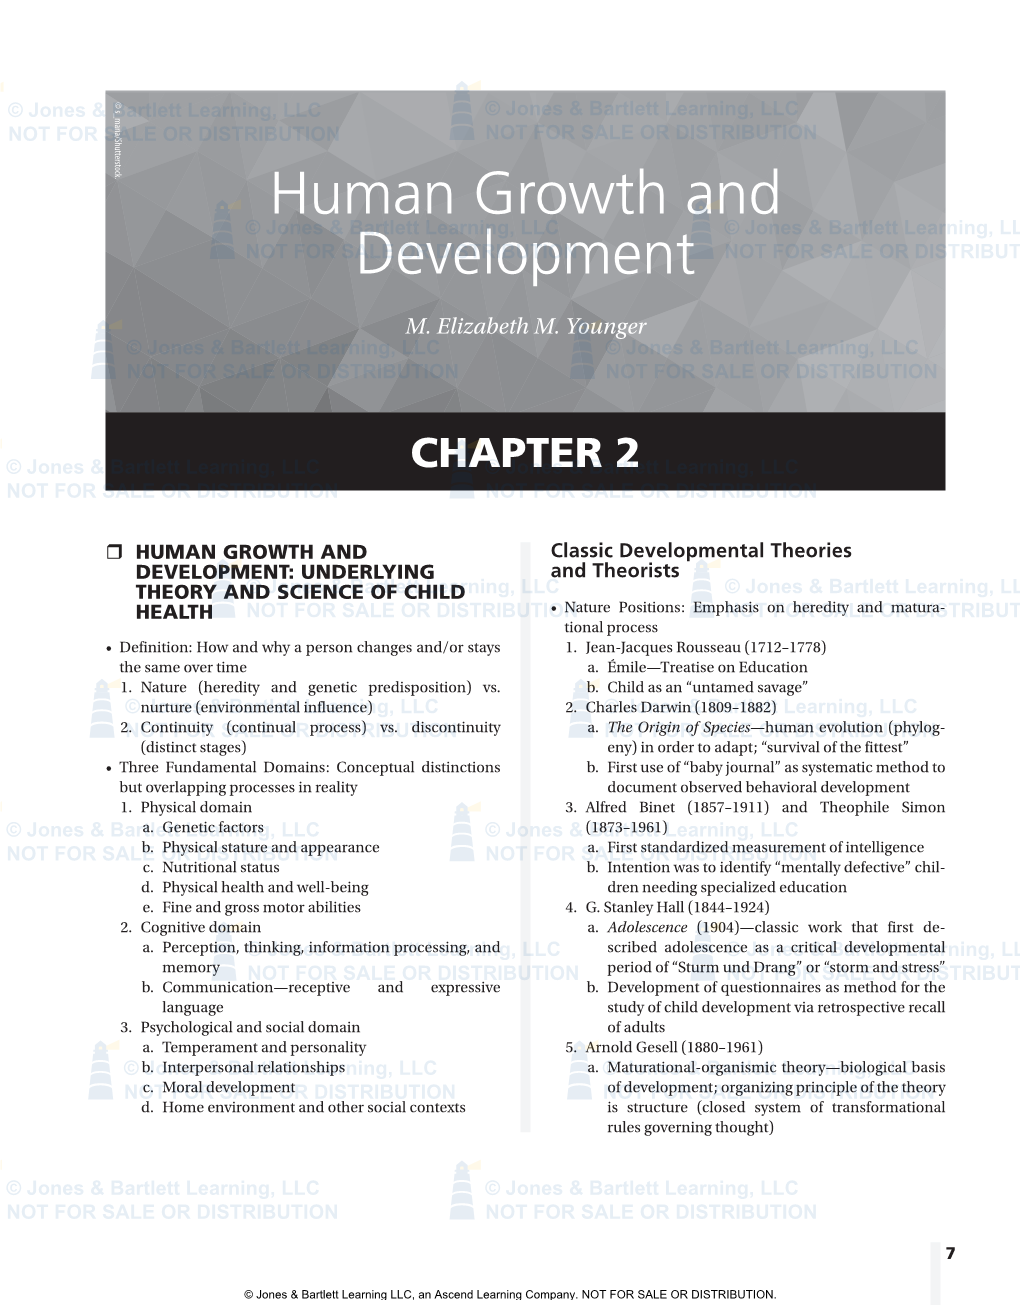 CHAPTER 2 Human Growth and Development